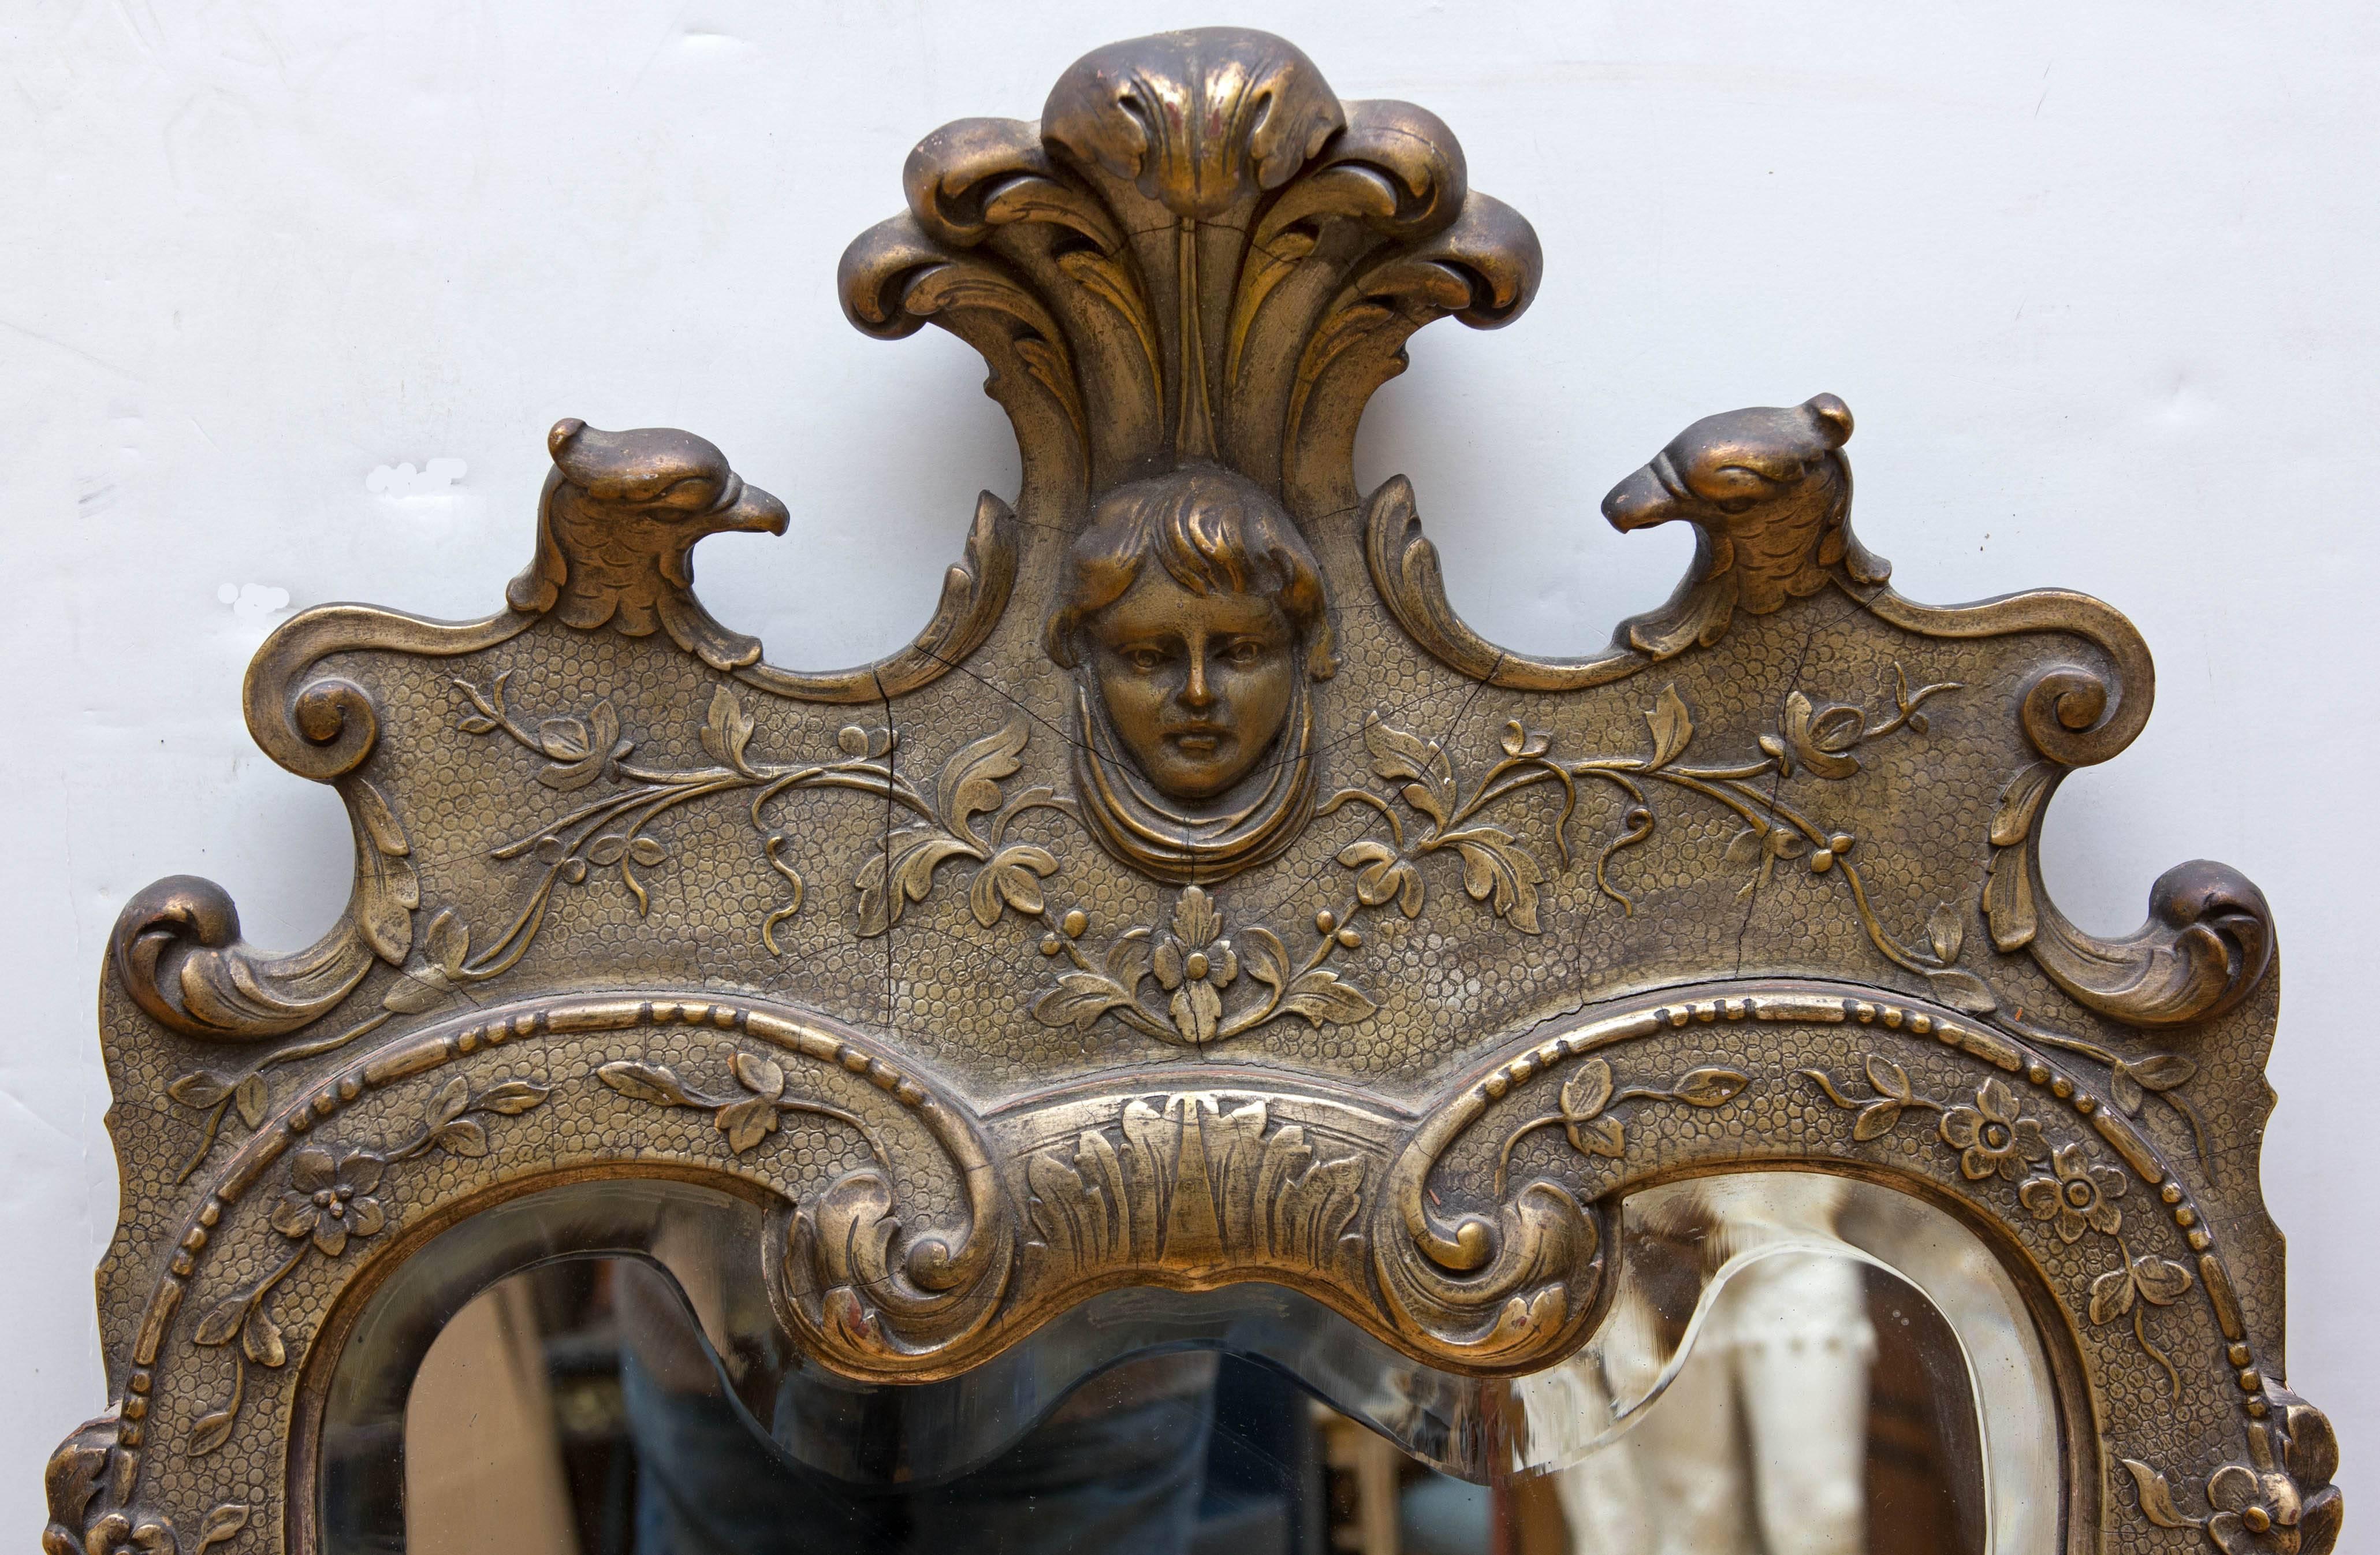 Antique George II revival silver gilt console mirror. Carved wood and gesso decoration. Mirror is beveled and original, circa 1920s. Please, contact us for shipping options.